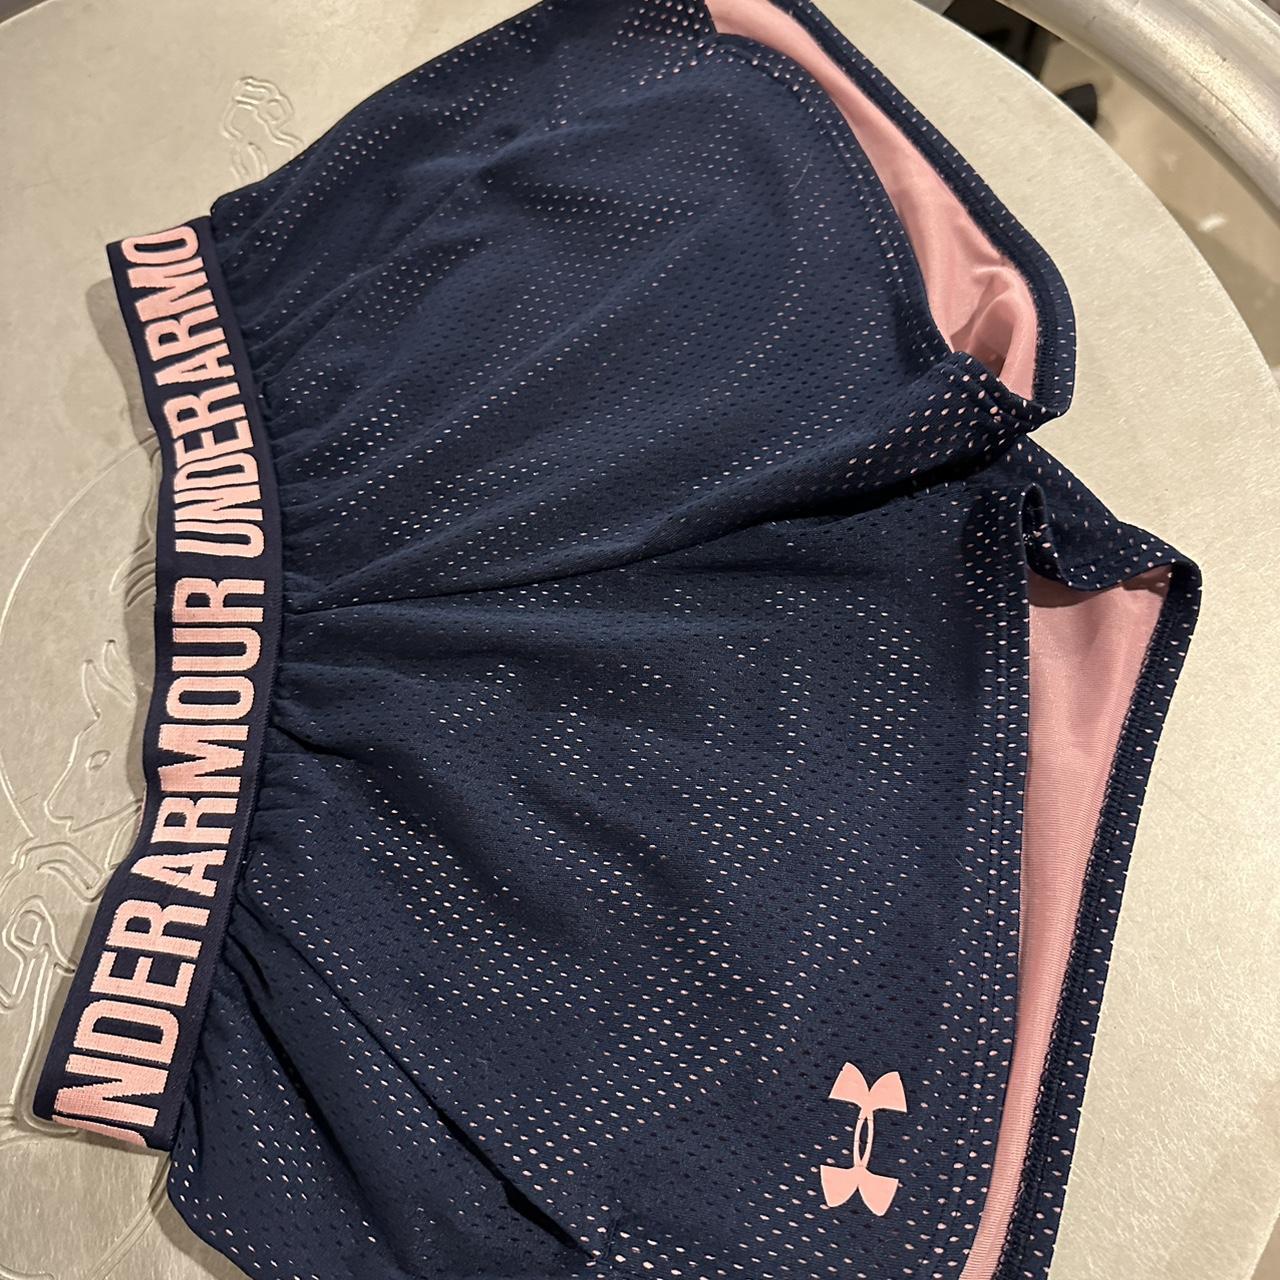 Under Armour shorts Xs Has front pockets - Depop